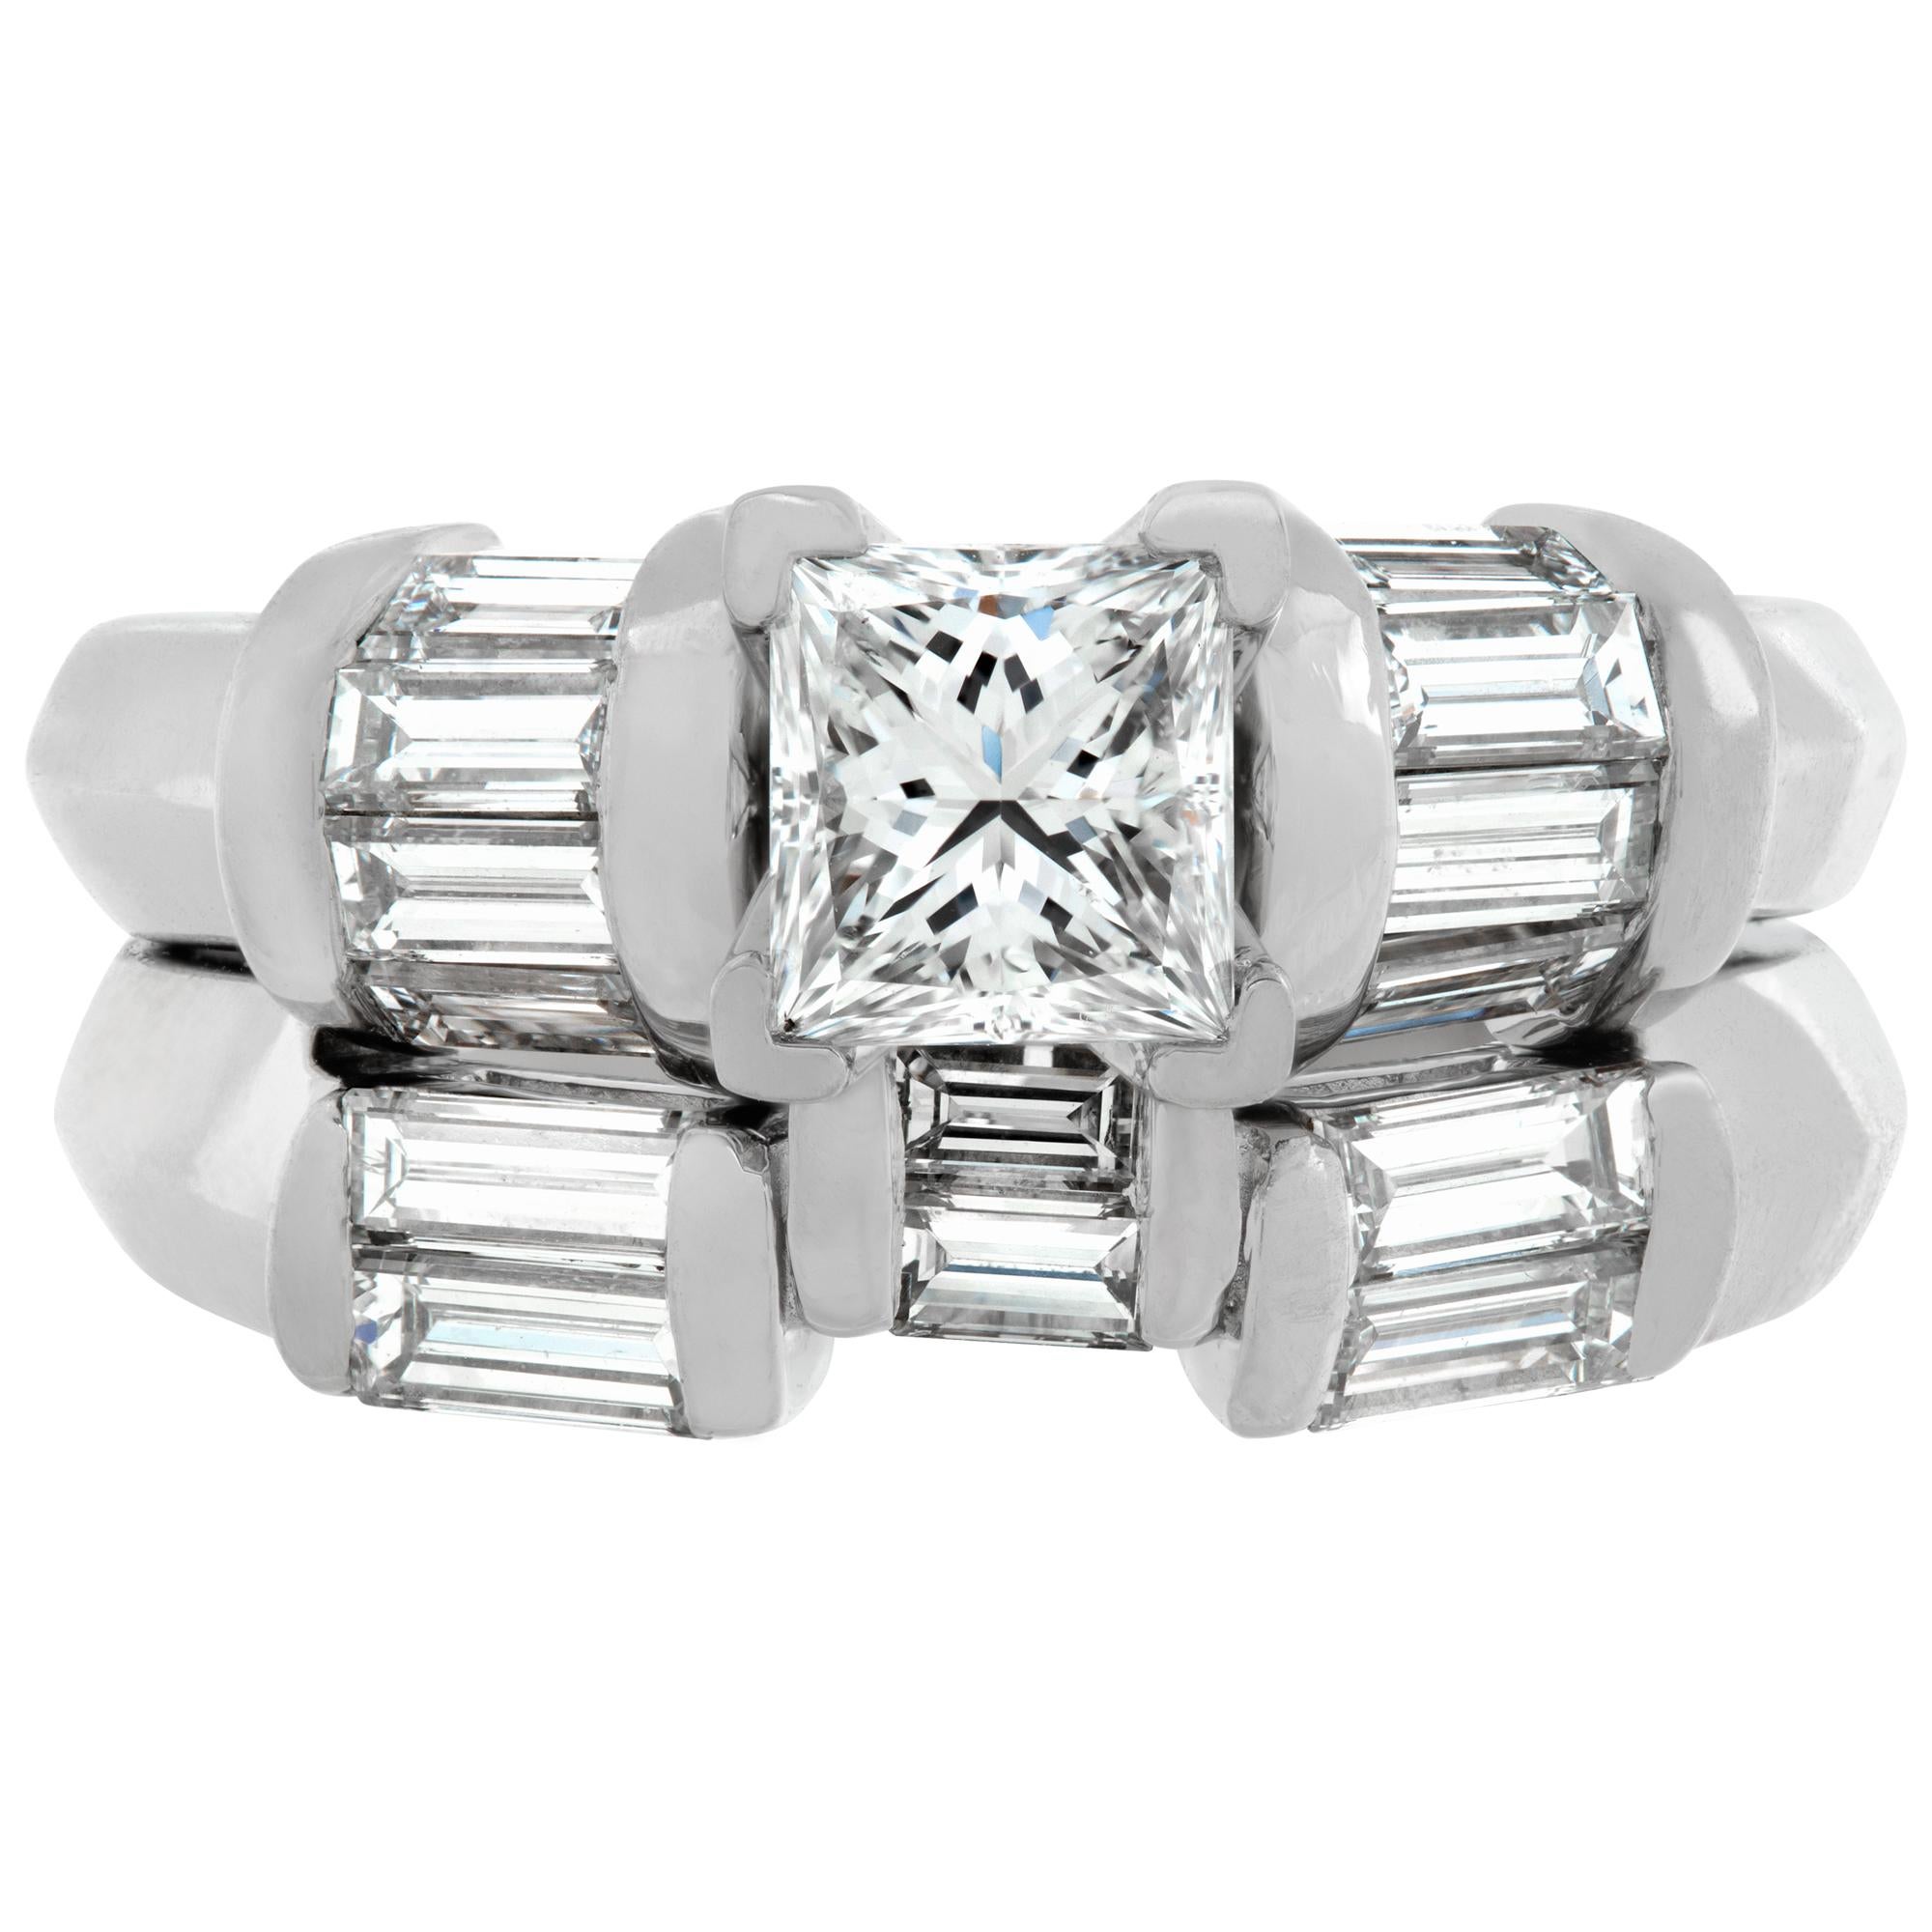 GIA certified rectangular modified brilliant cut diamond: 0.74 carat, E color- SI1 clarity, set in engagement ring with matching wedding band in platinum. Baguette diamonds total approx. weight: 1.00 carat, estimate: G-H color, VS-SI clarity. Size